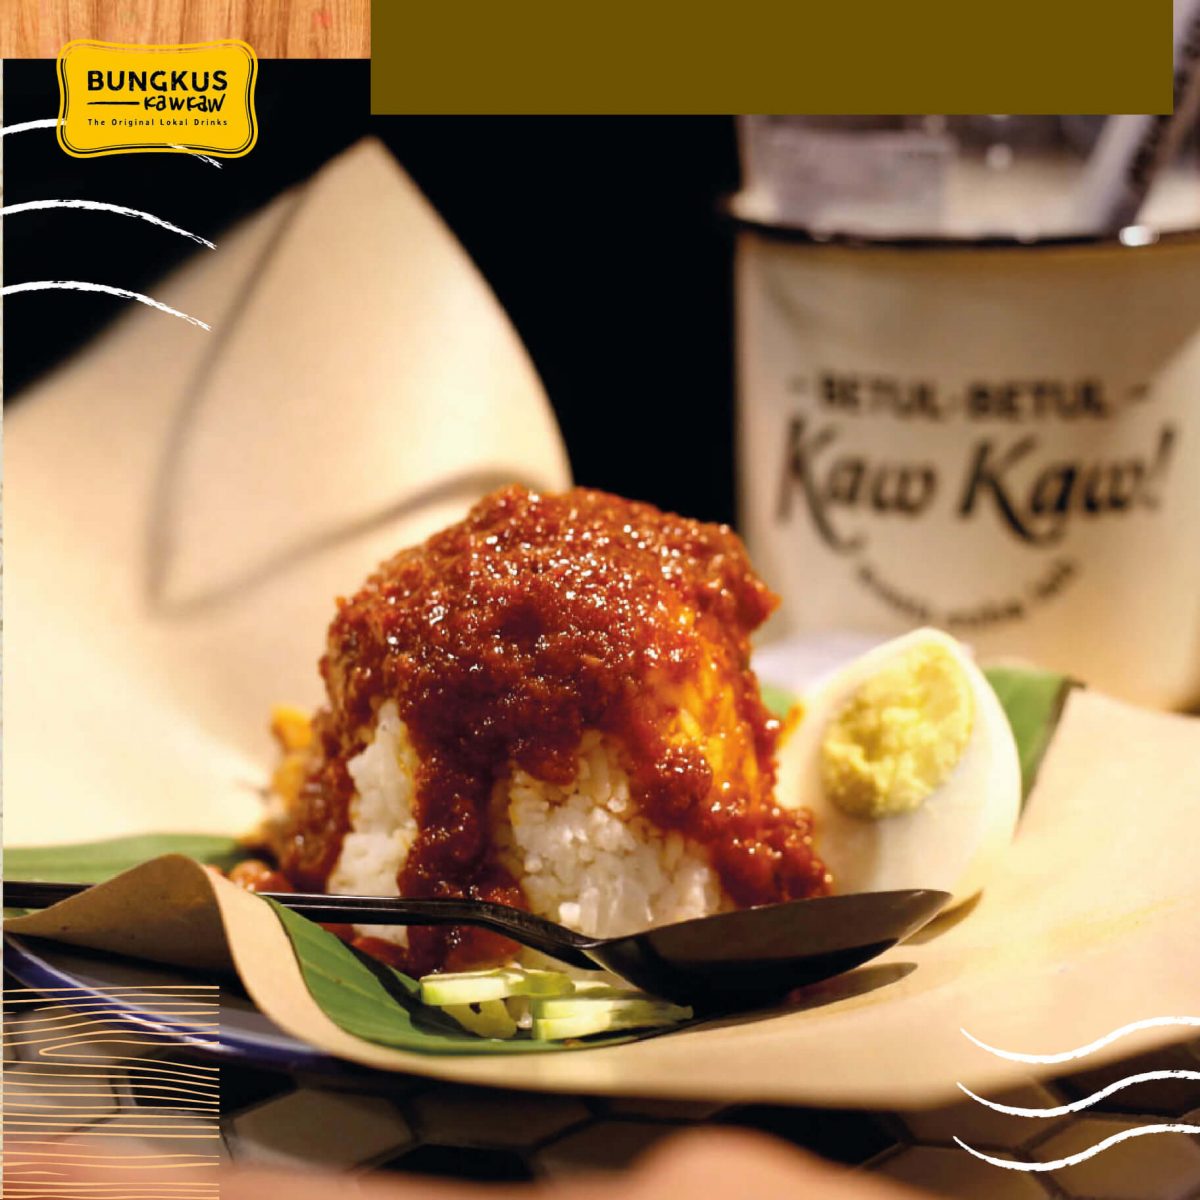 Bungkus kaw kaw - Malaysia’s national dish – Nasi Lemak is a must-try!